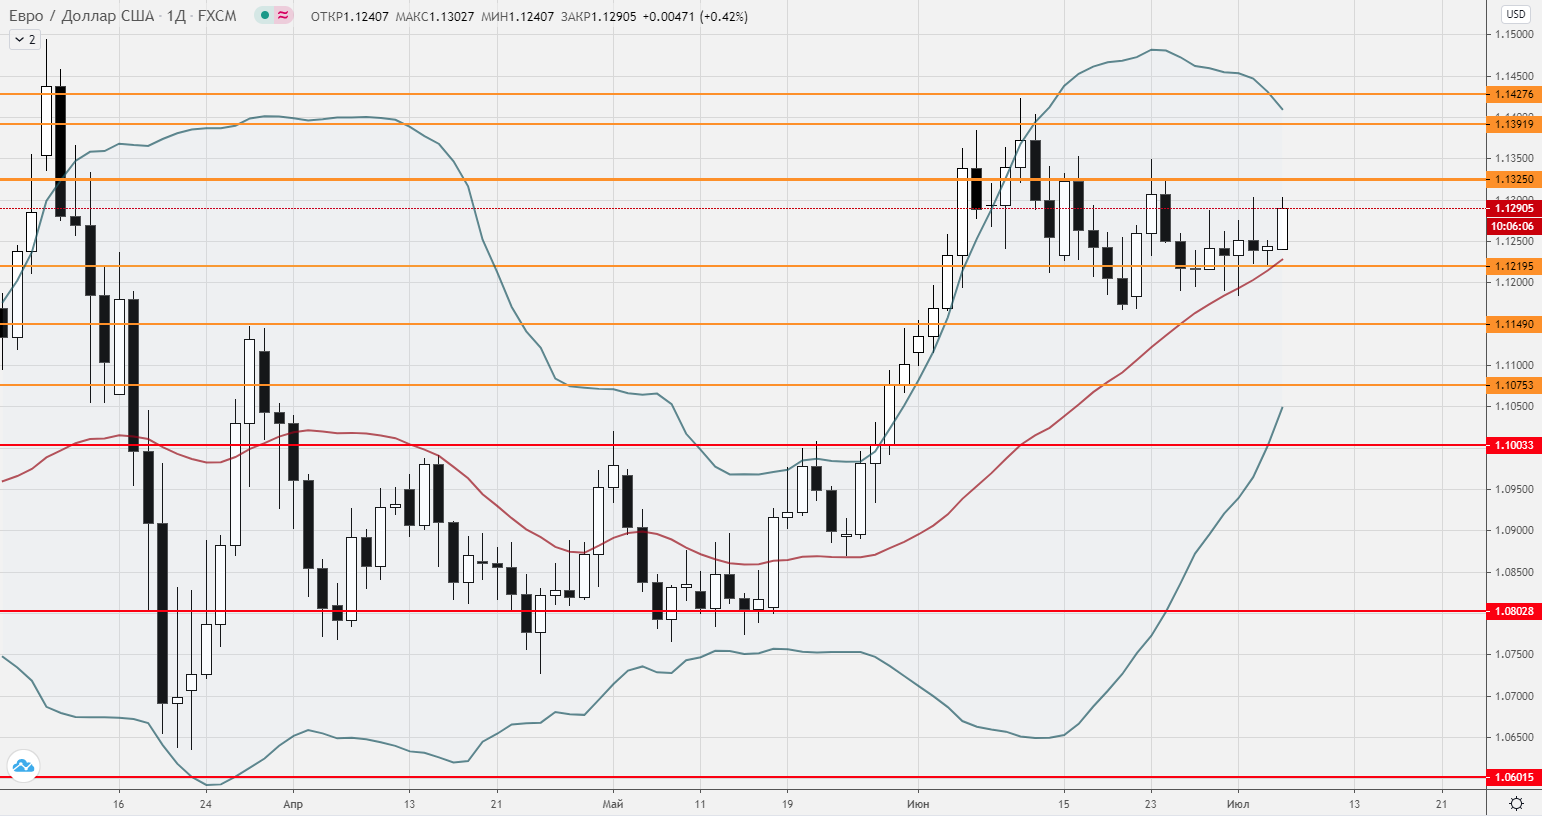 Forex Weekly Forecast & FX Analysis July 6 - July 10